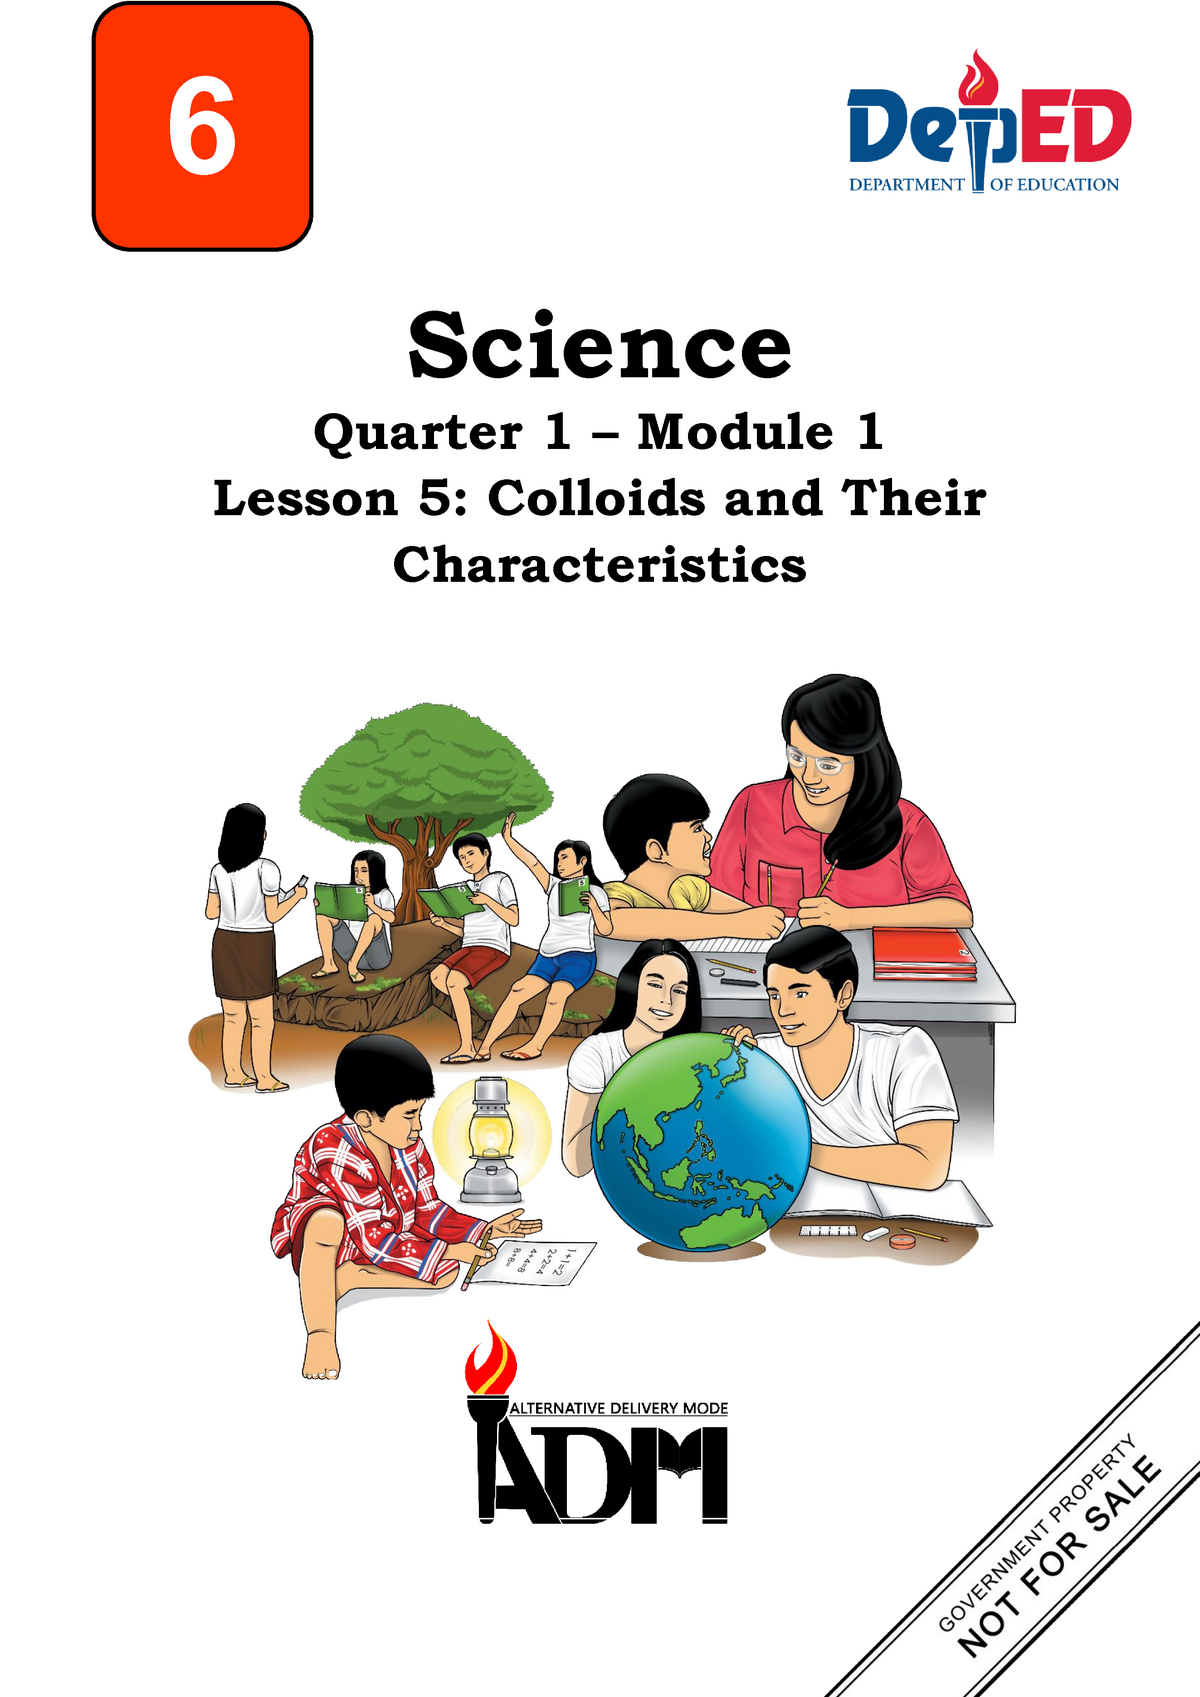 science-6-q1-mod1les5-colloids-and-their-characteristics-final-08032020-science-quarter-1